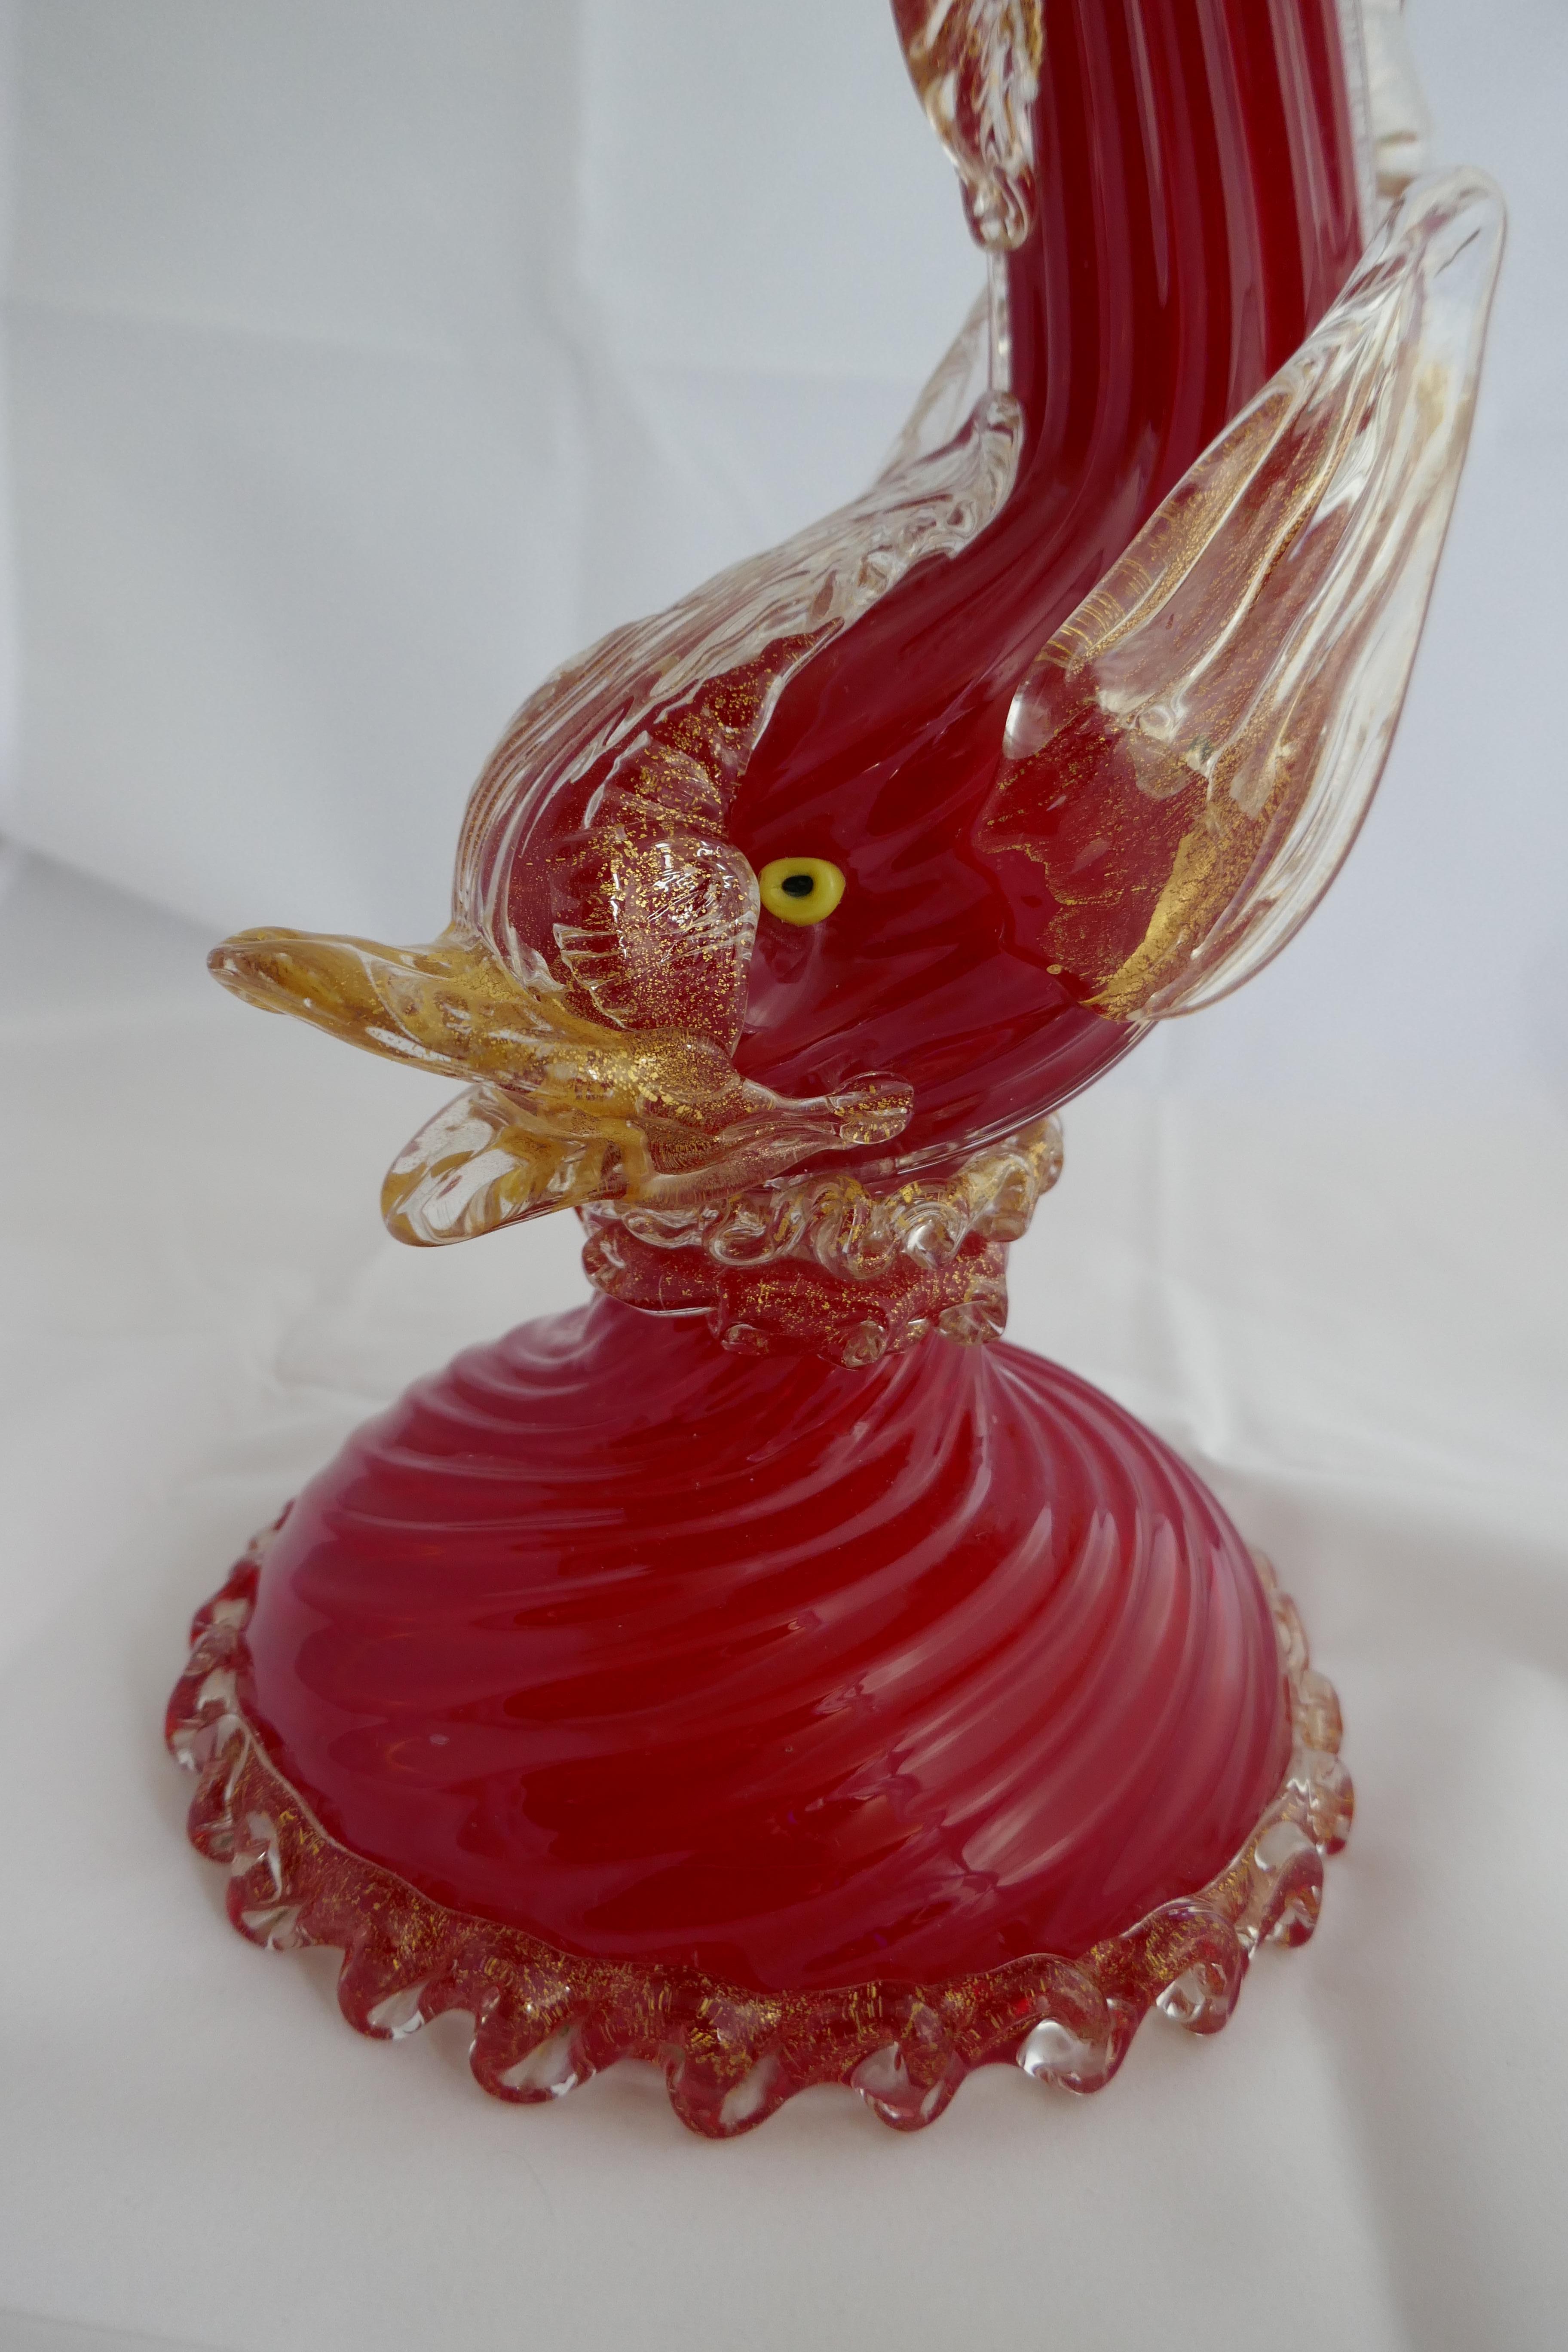 Hollywood Regency red Venetian Murano glass fish/dolphin glass table lamp

This lamp is in very good vintage condition, no chips cracks or repairs

The lamp is attributed to Barovier e Toso and produced circa 1940s, it is in red ribbed glass with